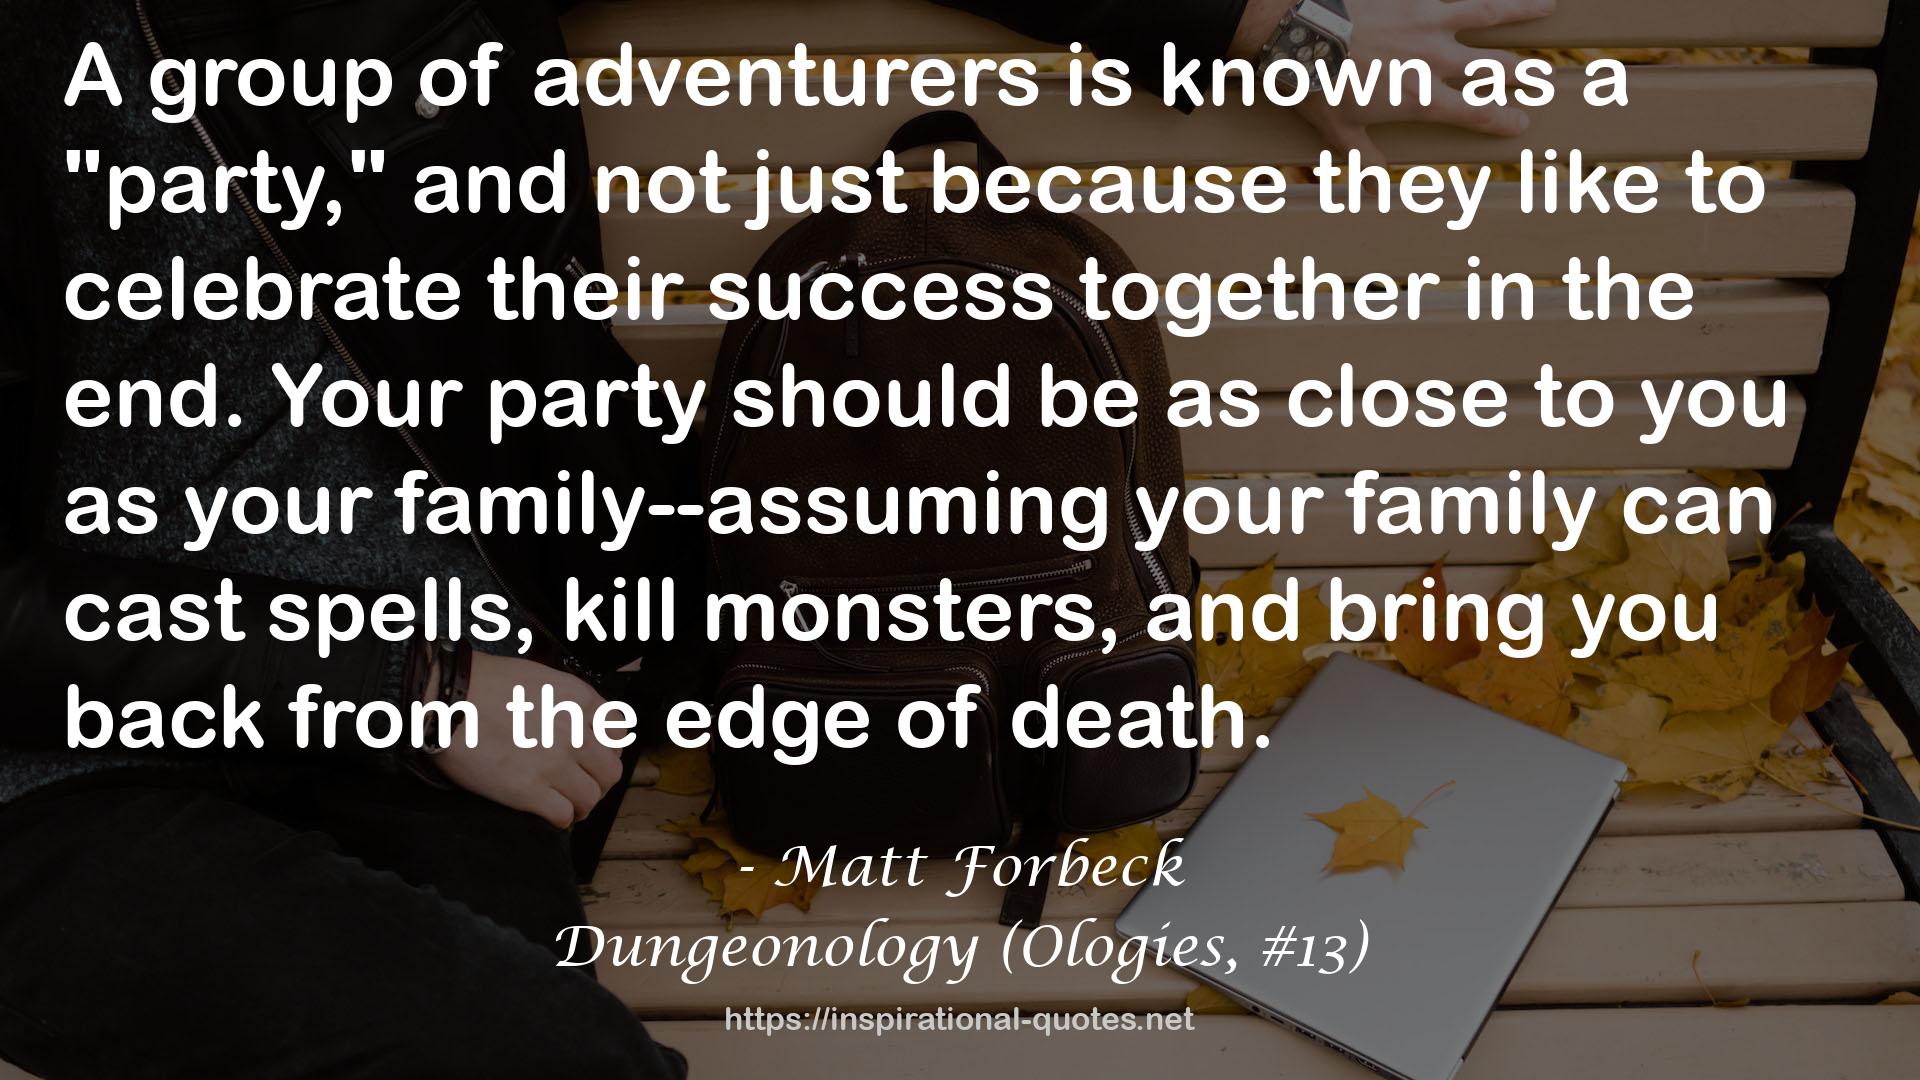 Dungeonology (Ologies, #13) QUOTES